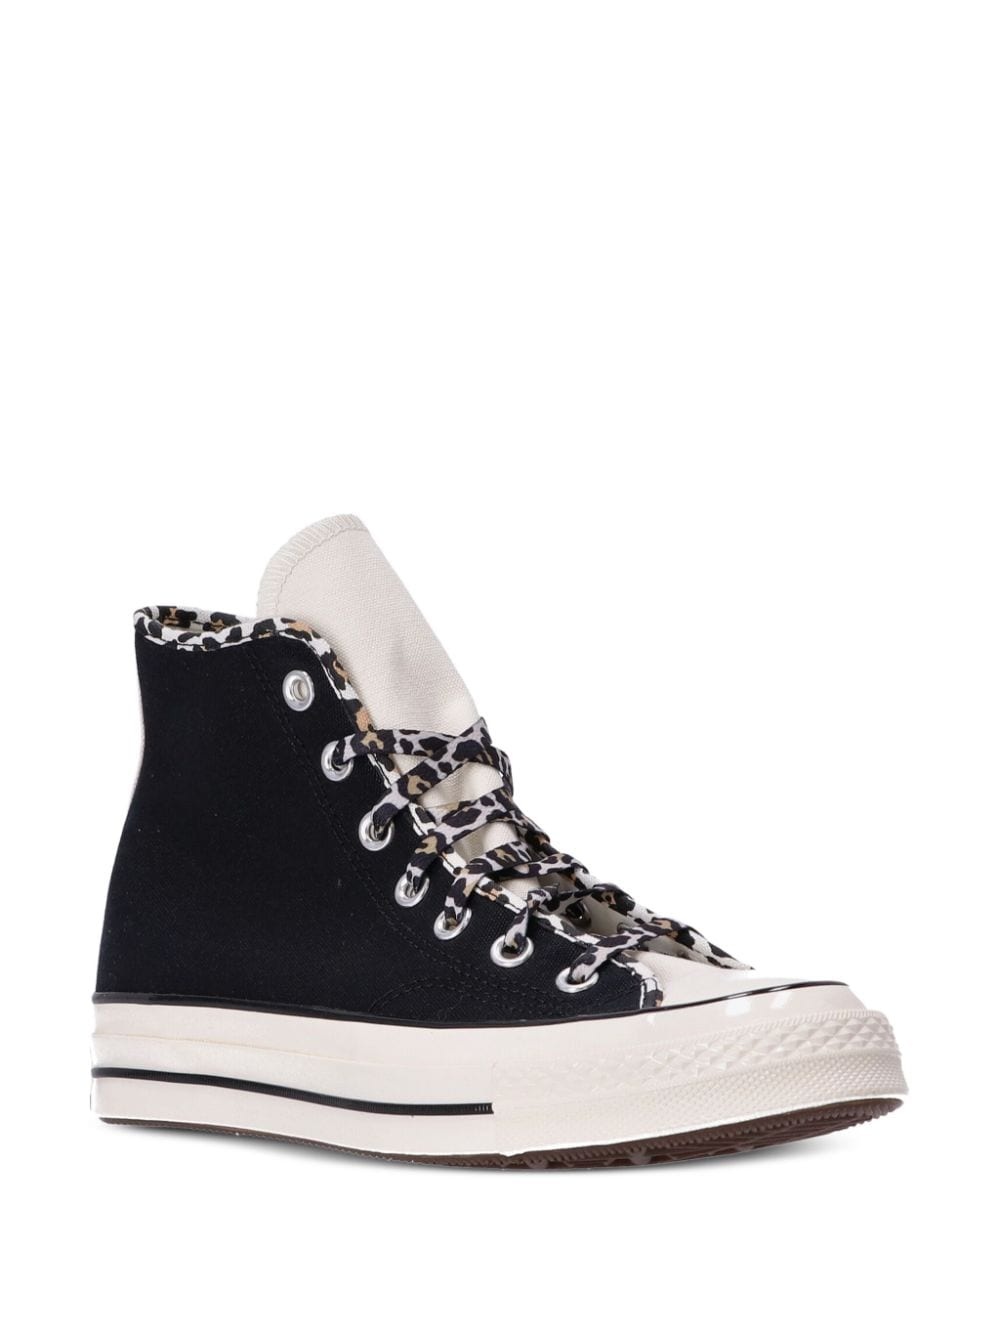 Chuck Taylor All Star Cruise Tiny Tattoos Unisex High Top Shoe.